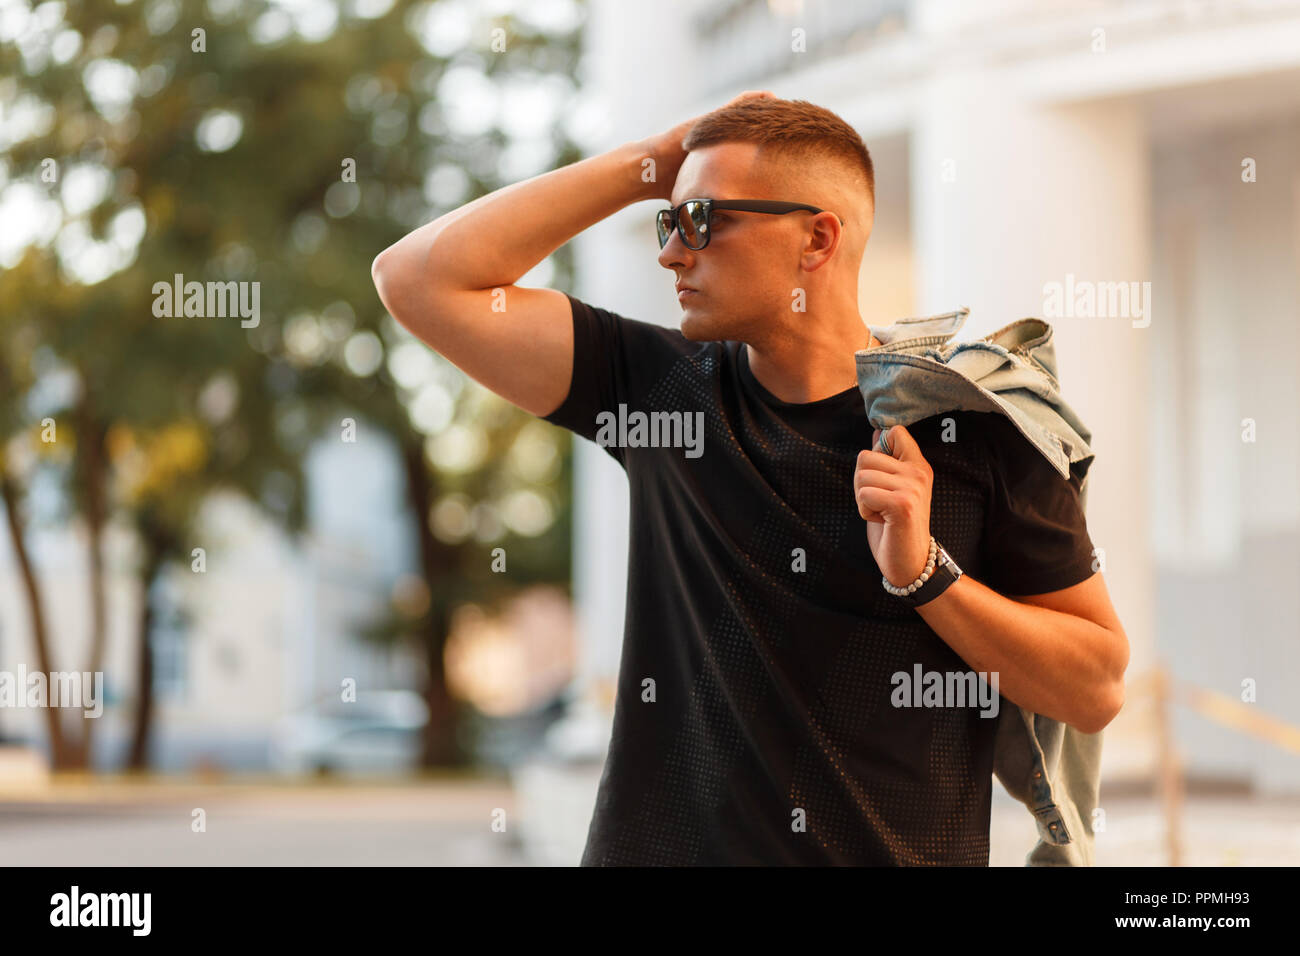 handsome fashionable hipster man with sunglasses in a black T-shirt with a jeans jacket in the street on a sunny day Stock Photo